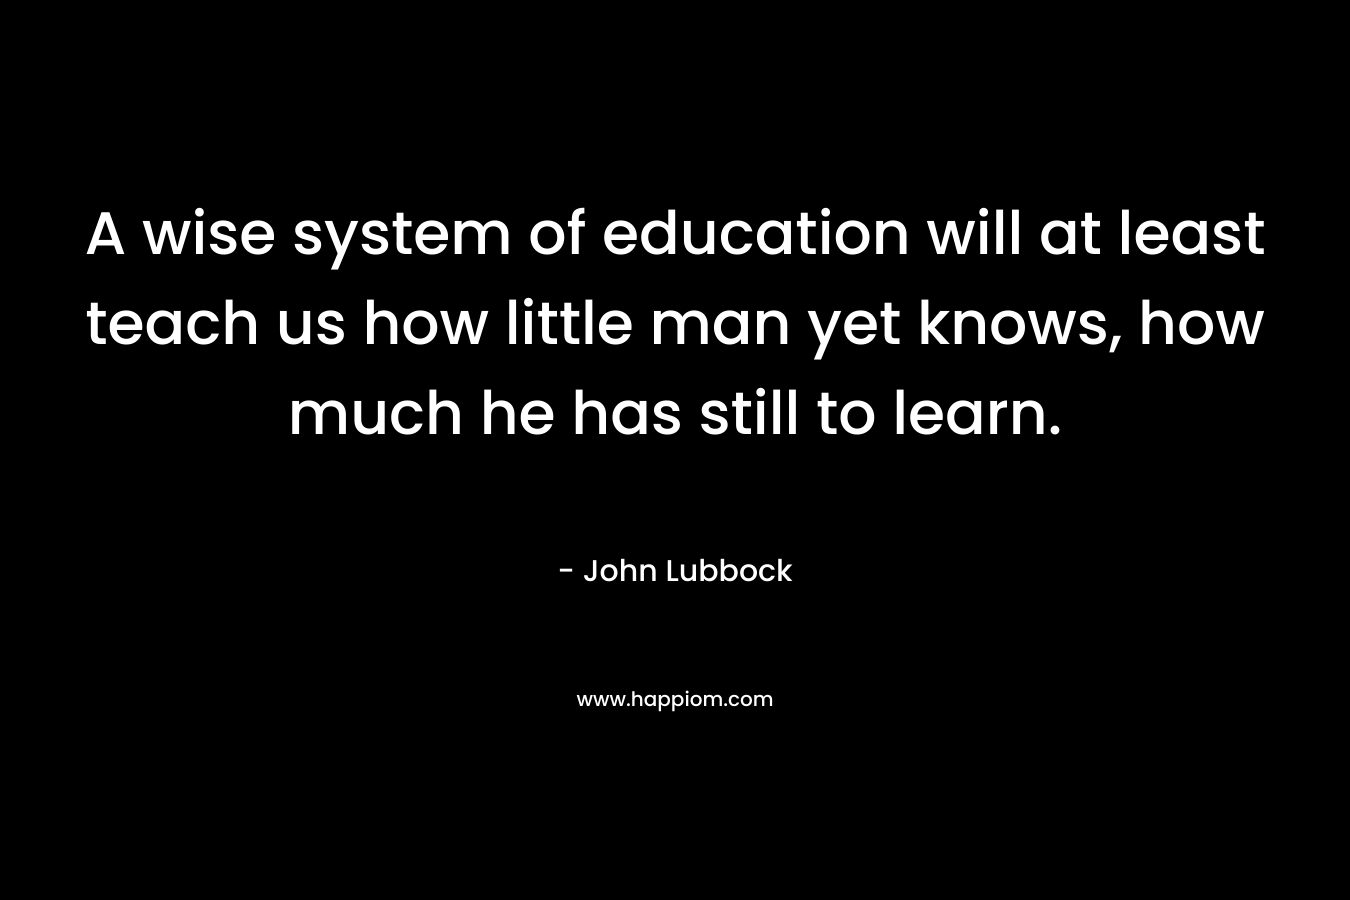 A wise system of education will at least teach us how little man yet knows, how much he has still to learn. – John Lubbock